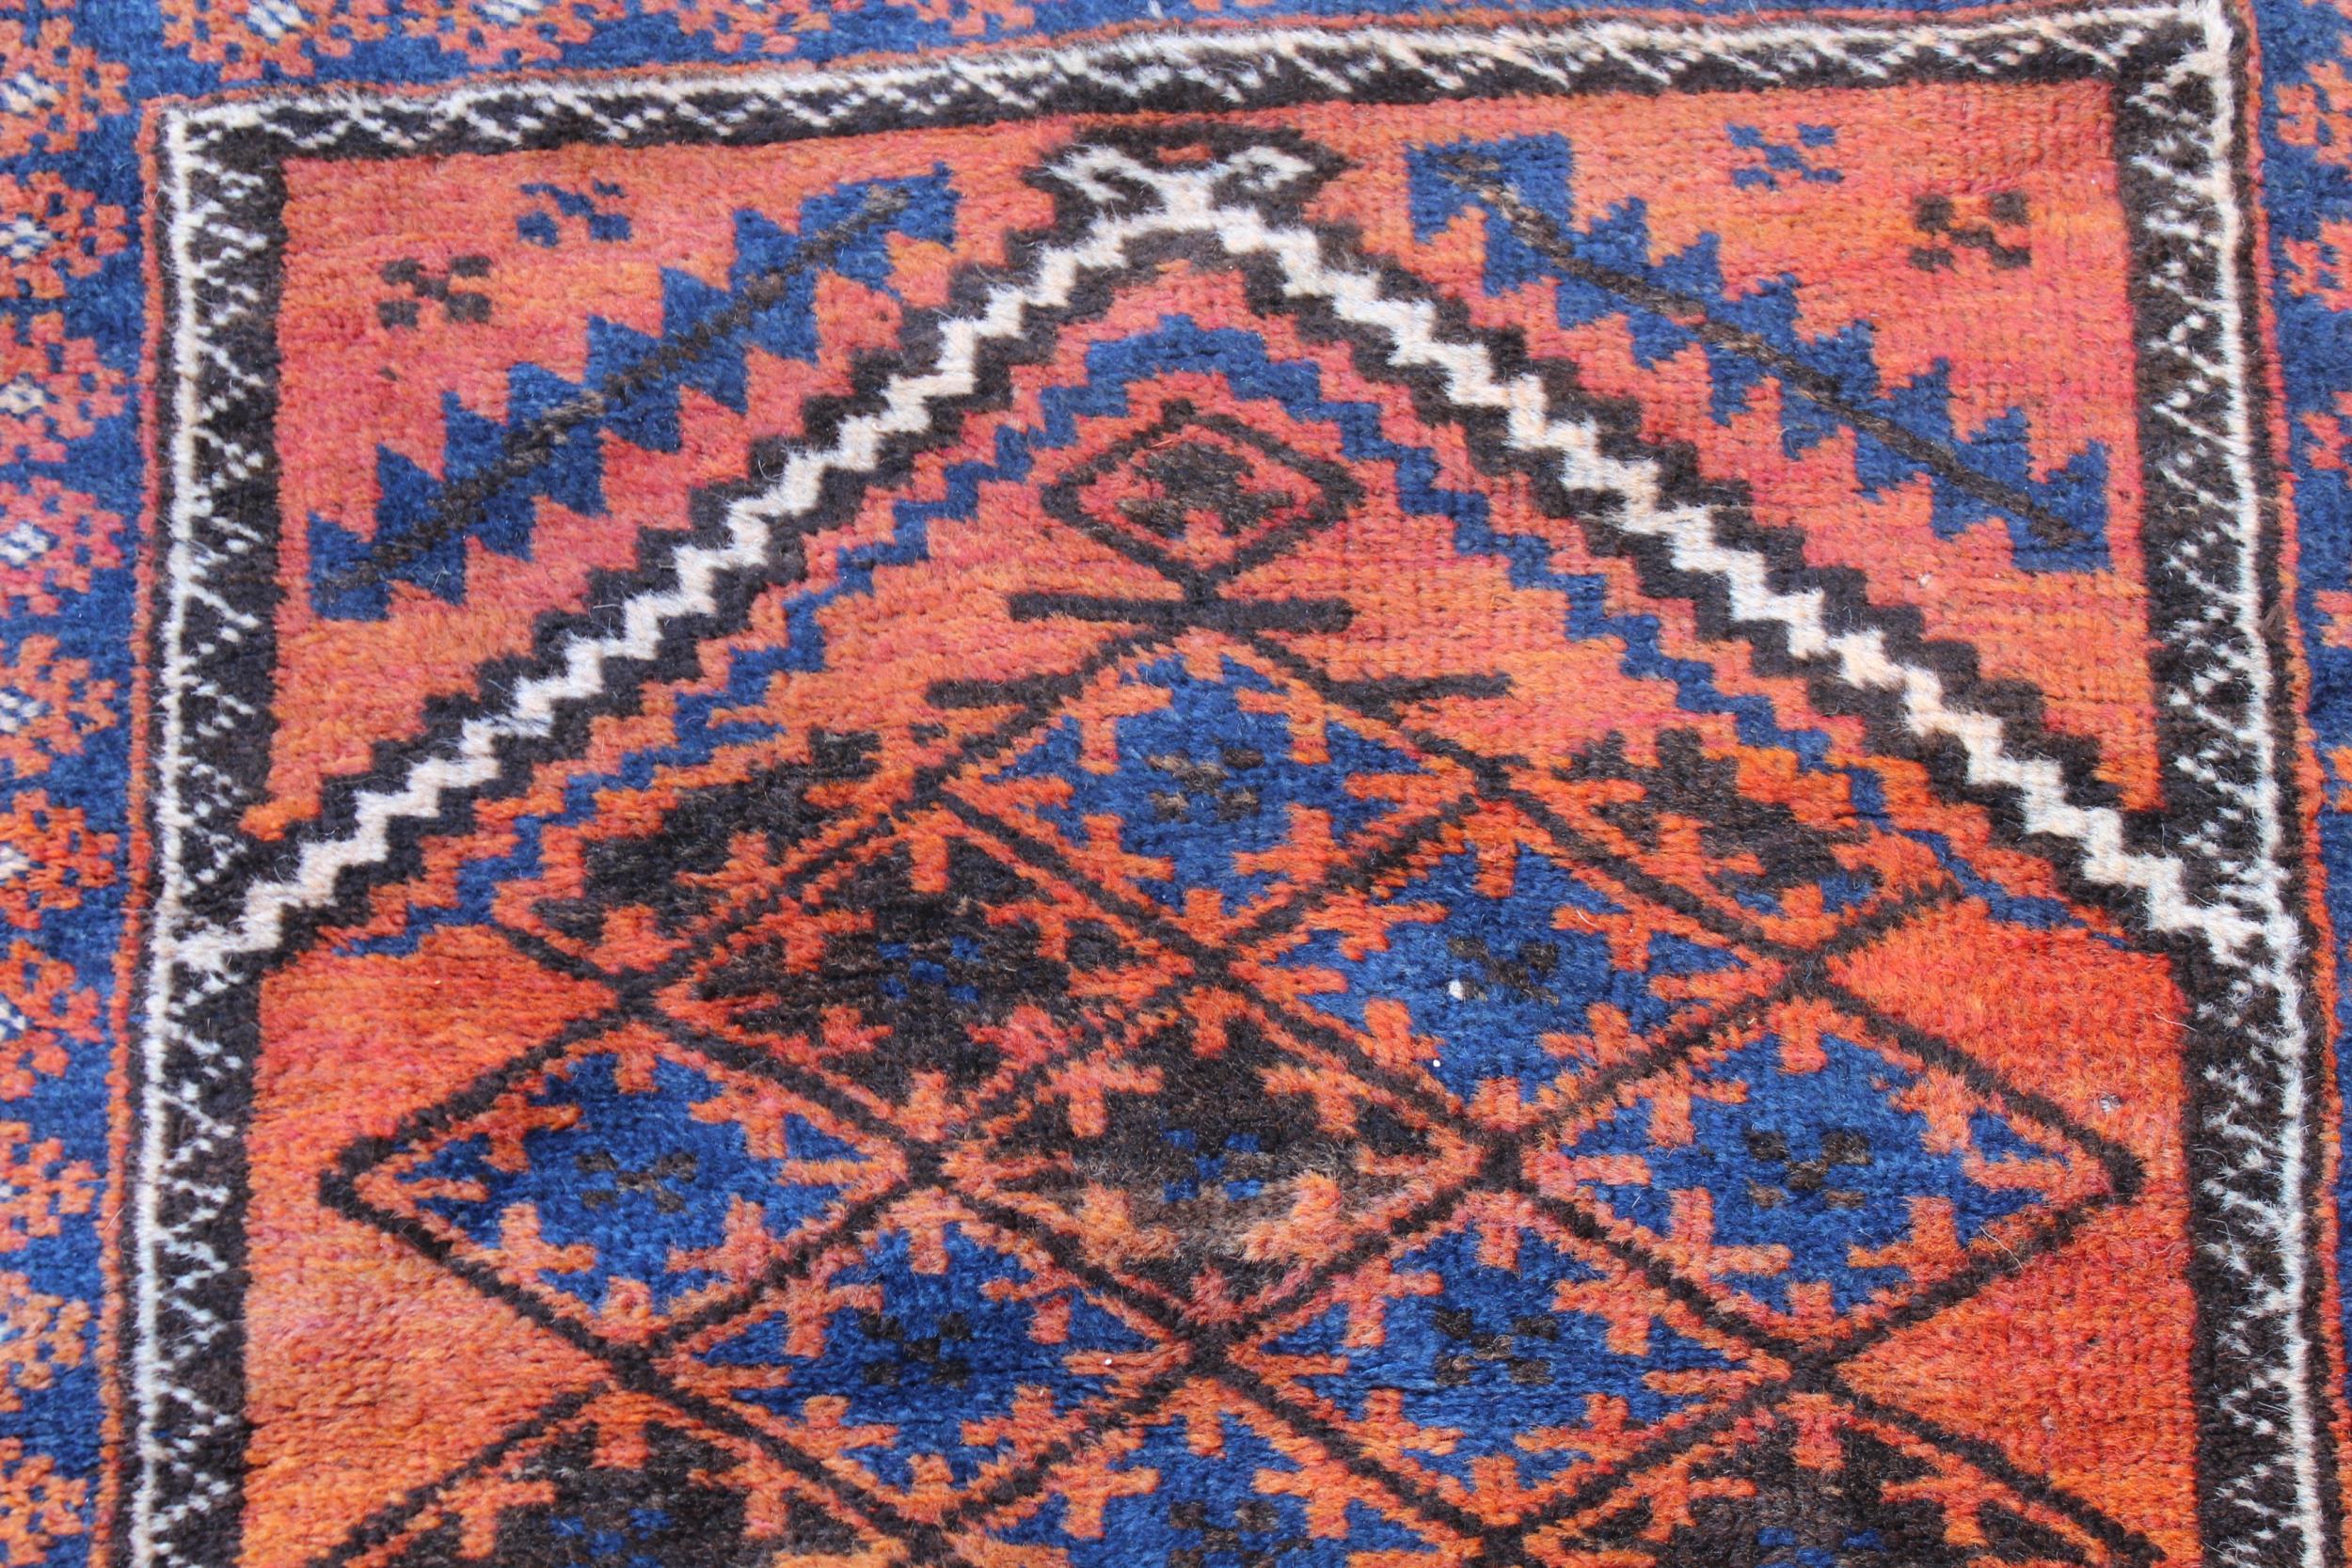 Small Afghan prayer rug, 3ft 8ins x 2ft 8ins approximately - Image 2 of 3